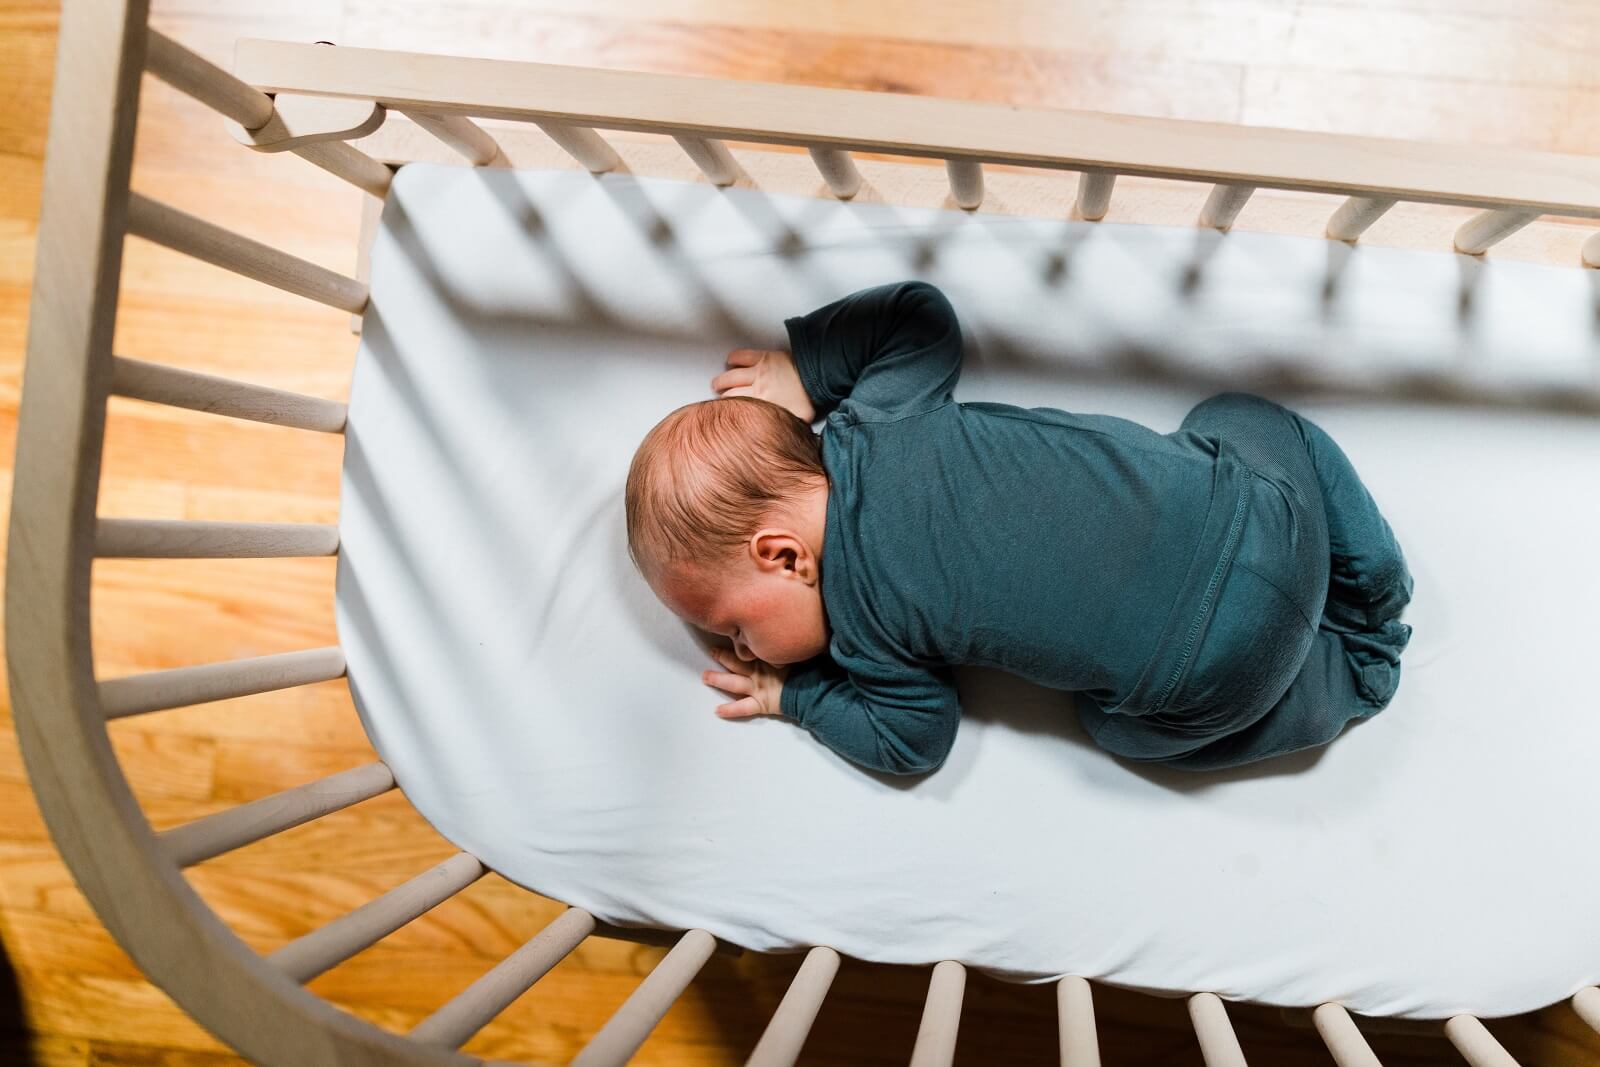 Does Your Baby’s Bed Follow Crib Safety Standards?